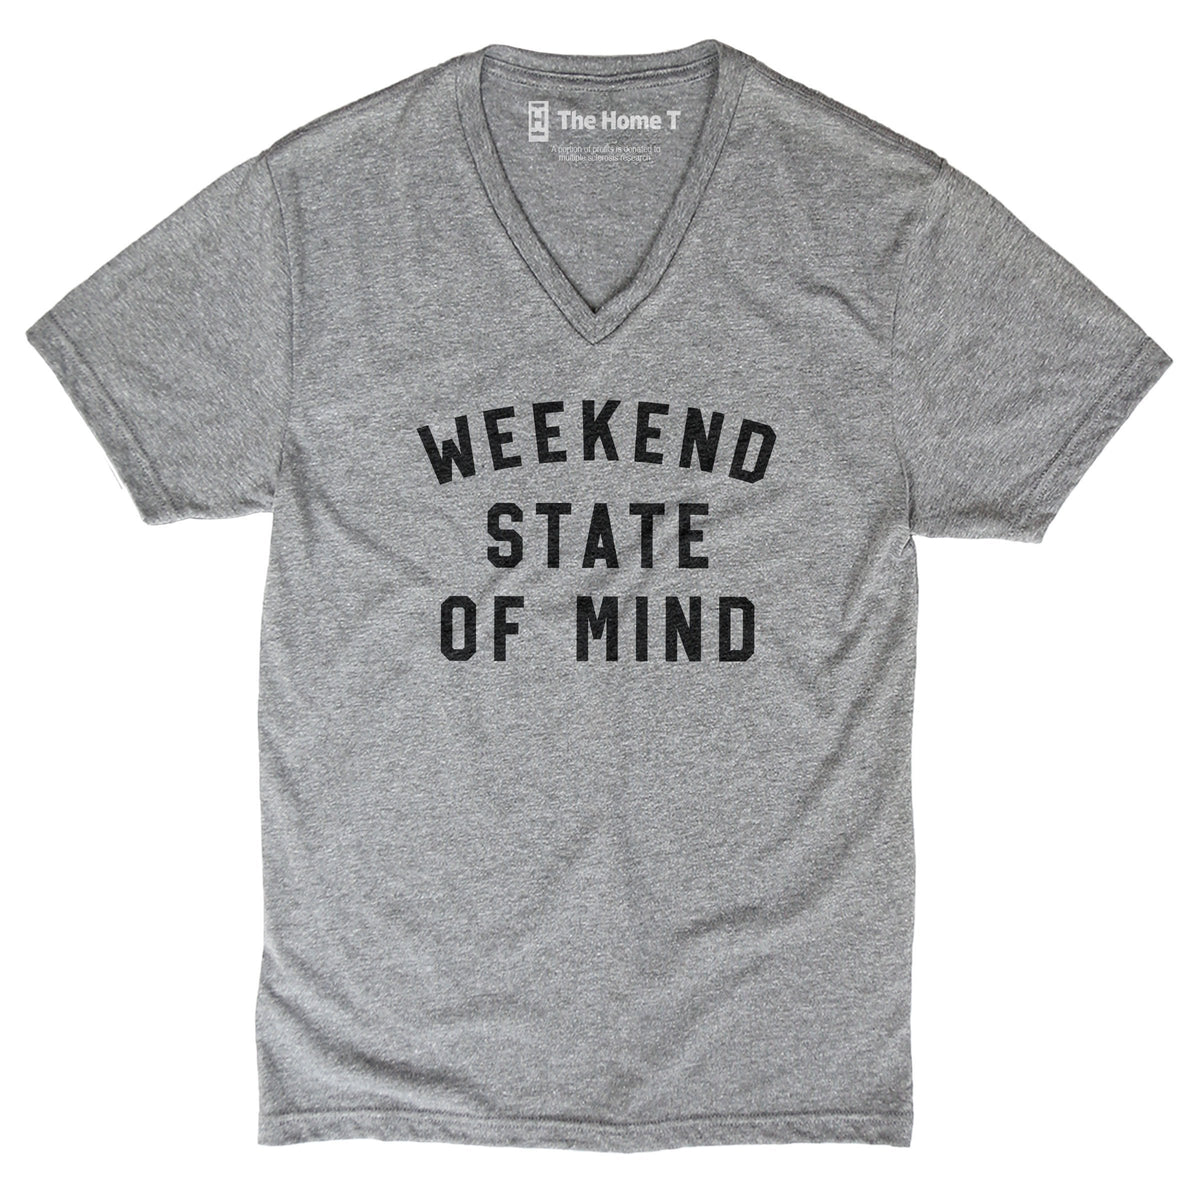 The Weekend Crew neck The Home T XS V-Neck